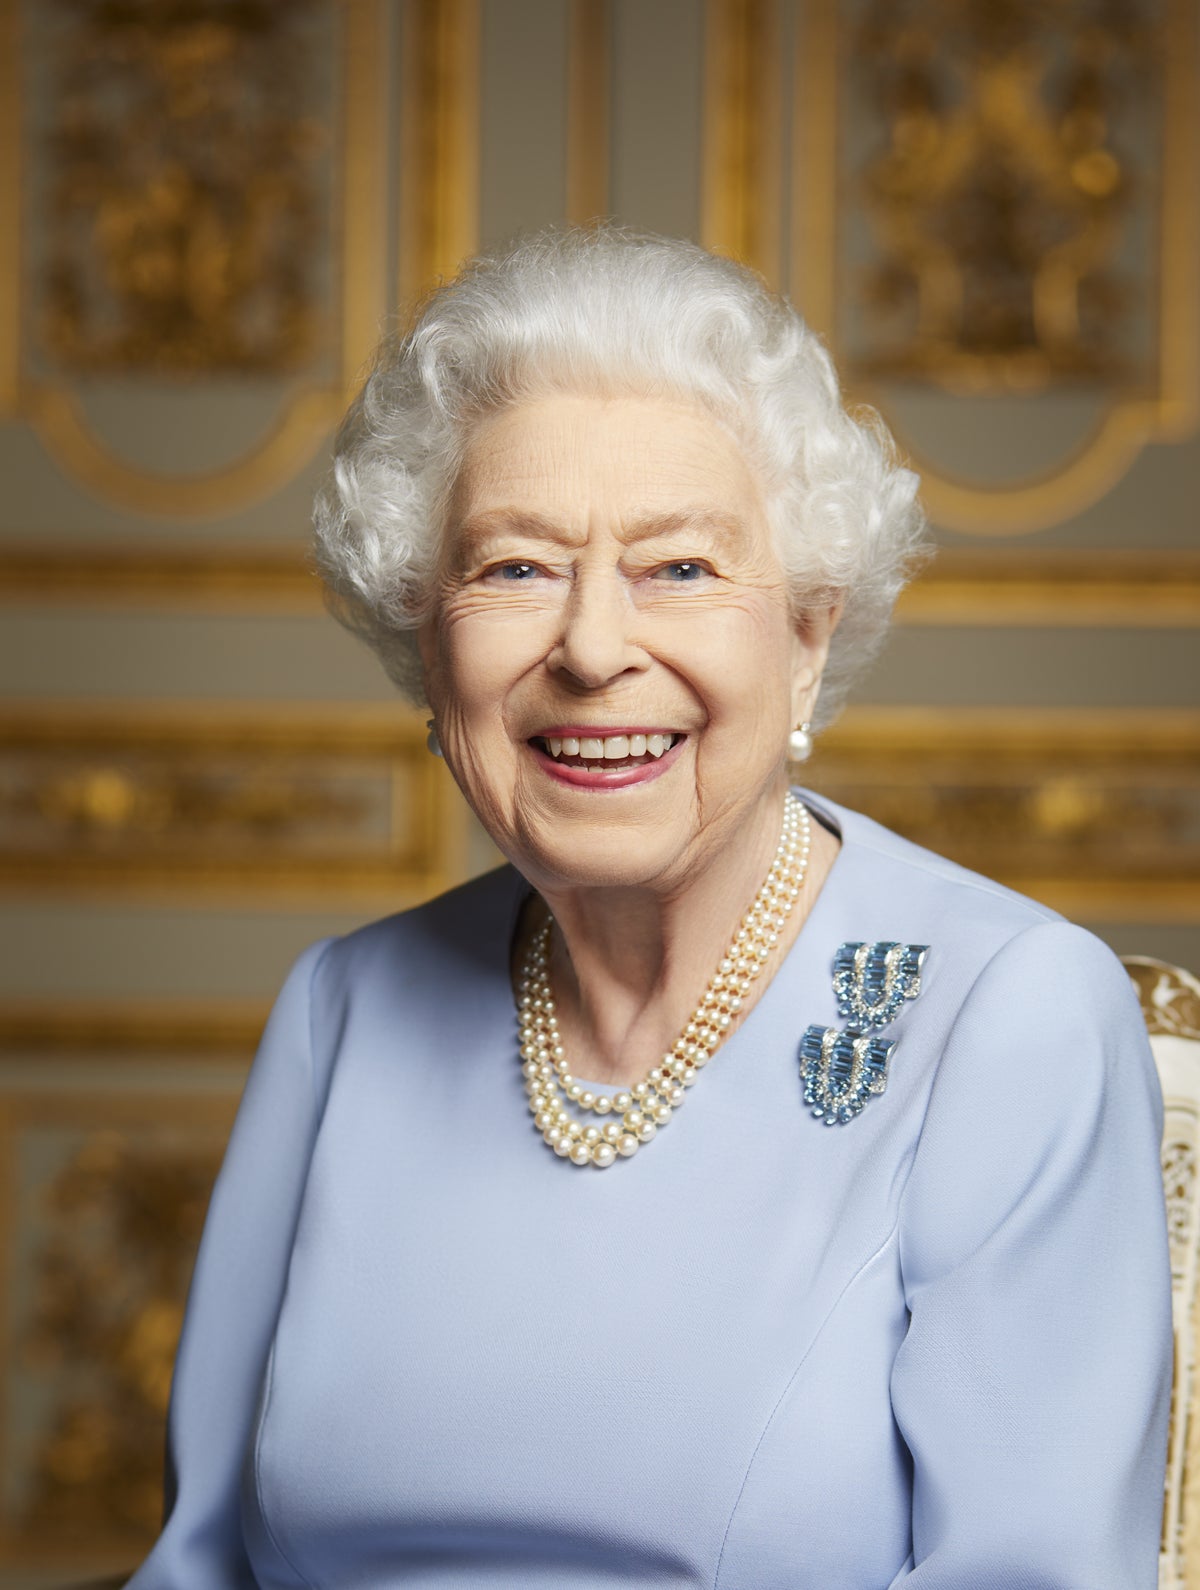 Unseen portrait of joyous Queen released by Palace ahead of final farewell